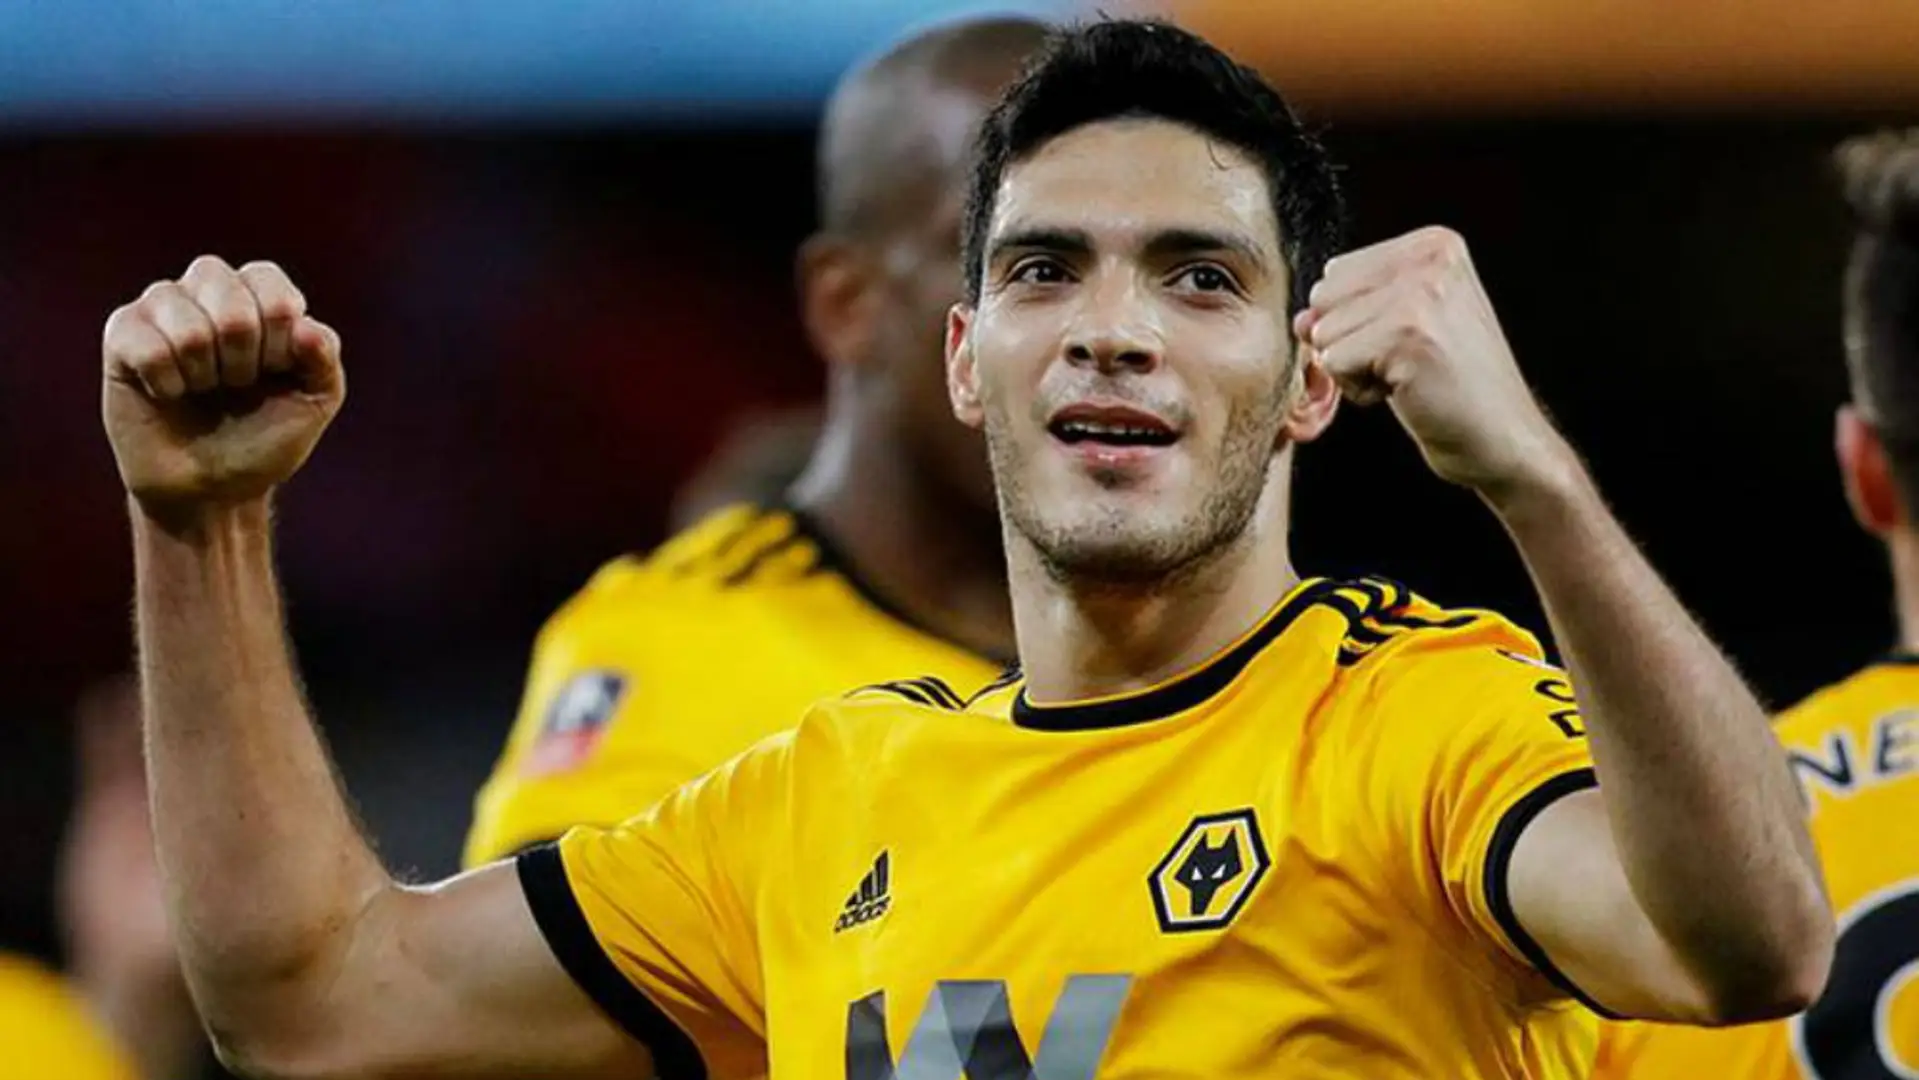 Madrid not giving up on Wolves striker Raul Jimenez, face competition from Juventus and Man Utd